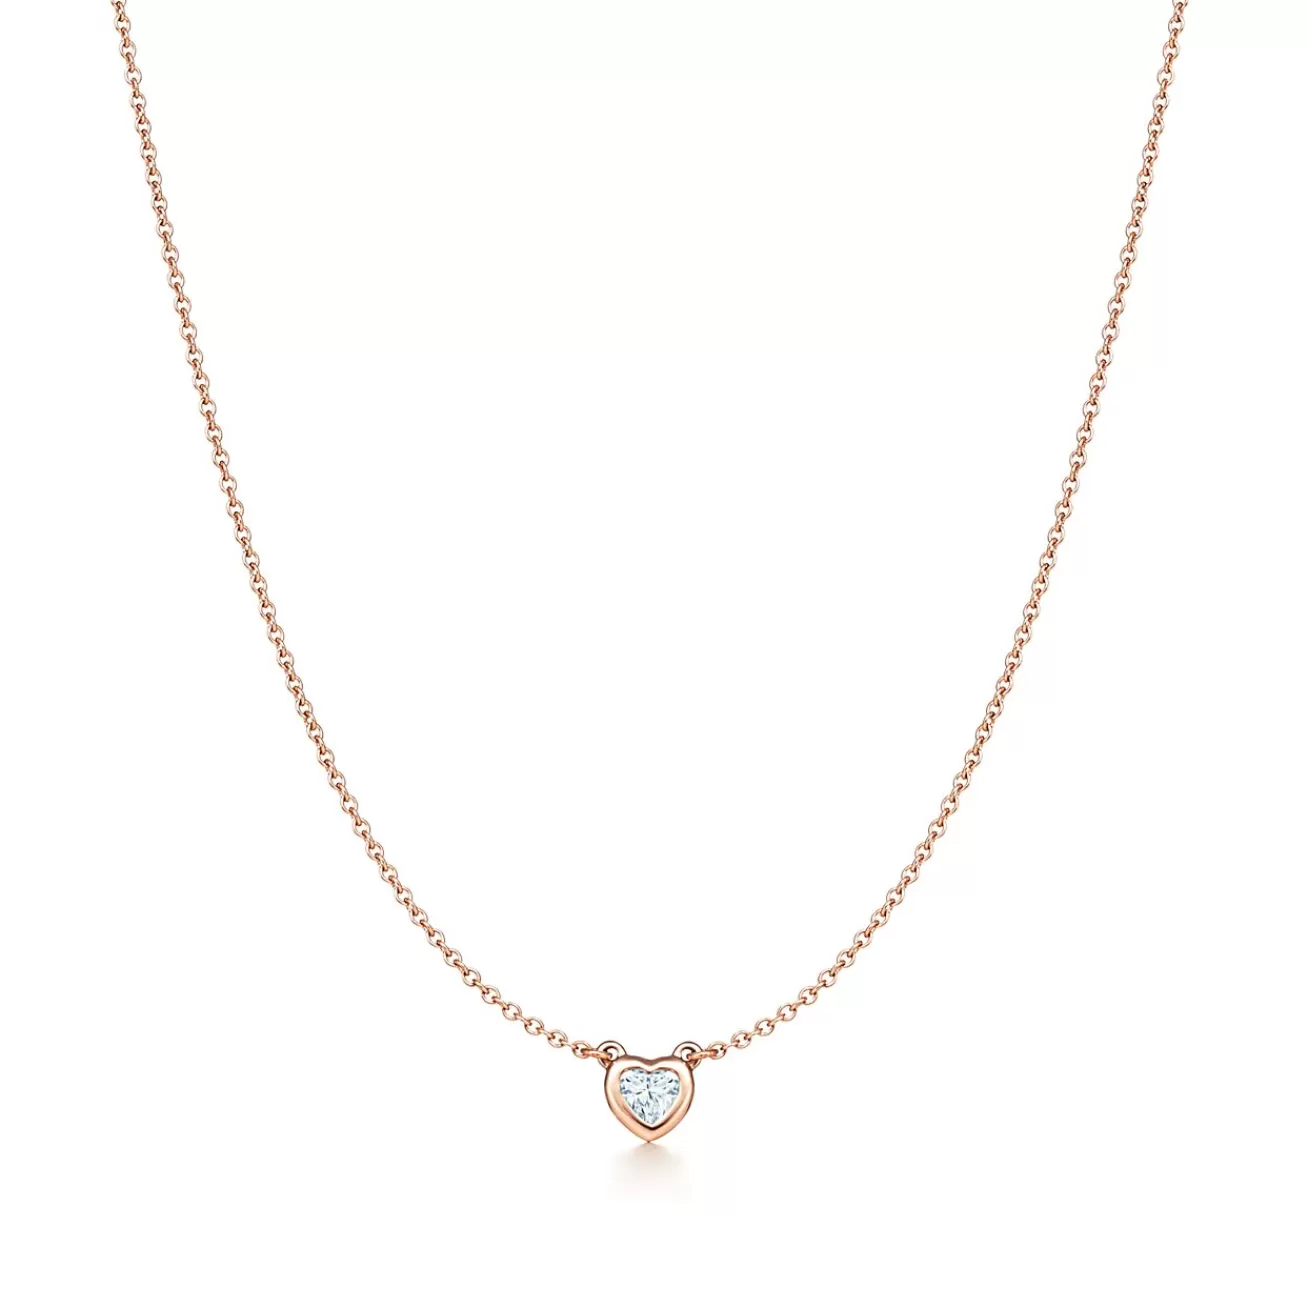 Tiffany & Co. Elsa Peretti® Diamonds by the Yard® heart necklace in 18k rose gold. | ^ Necklaces & Pendants | Rose Gold Jewelry